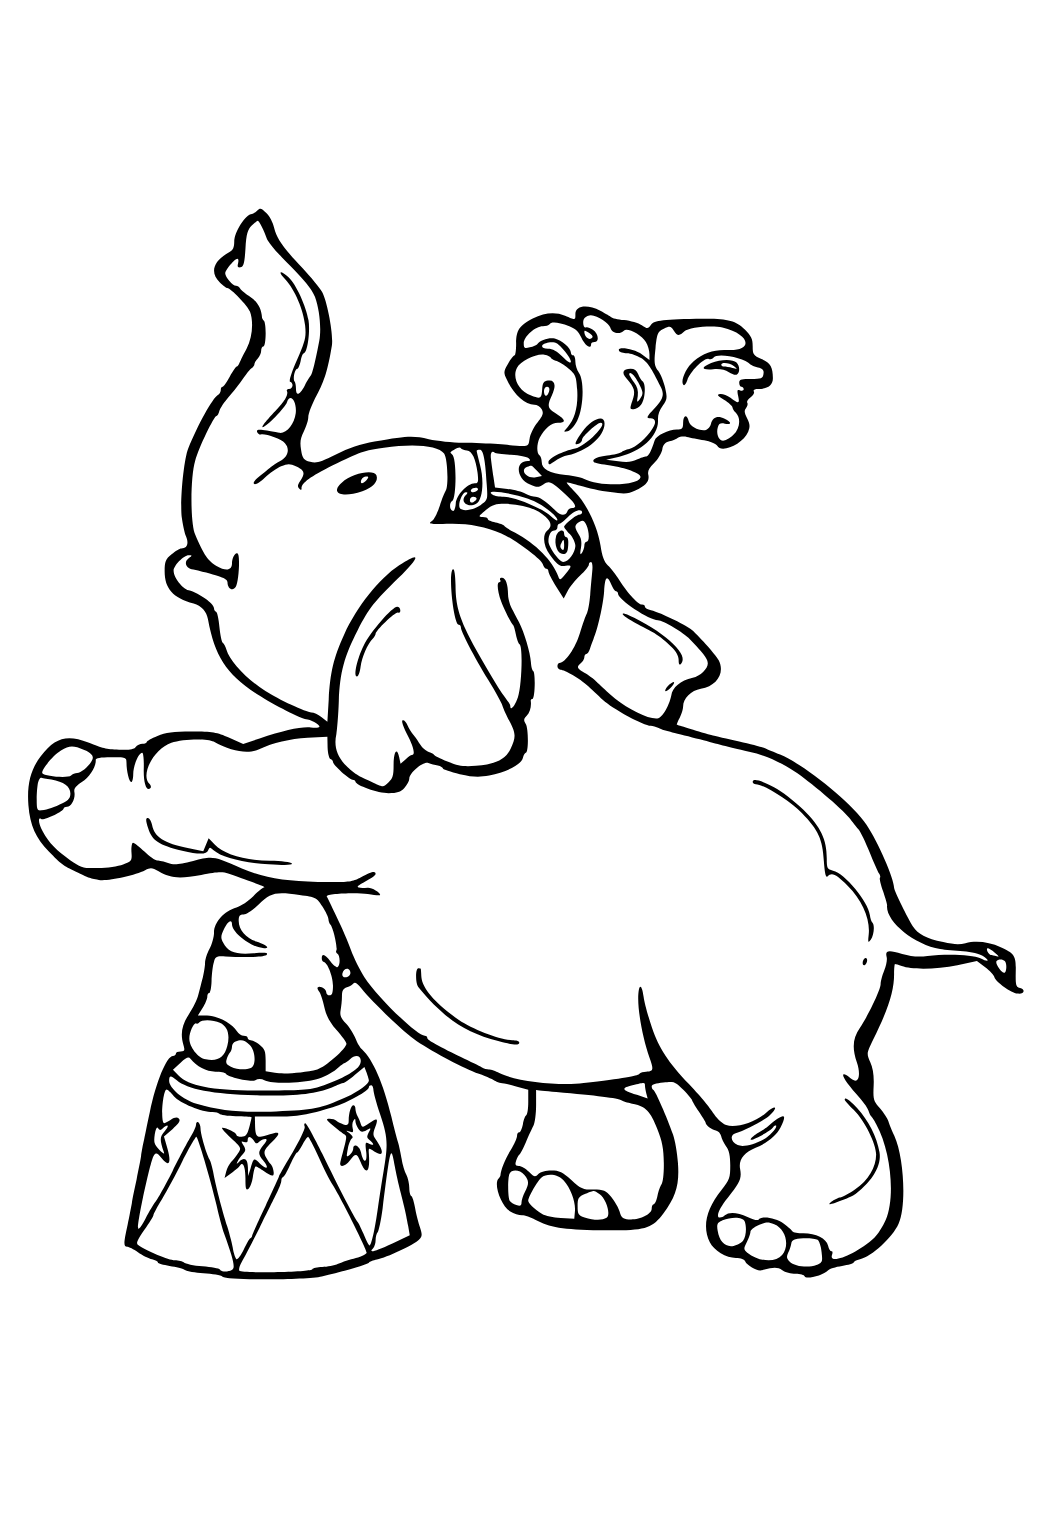 Free printable circus elephant coloring page for adults and kids